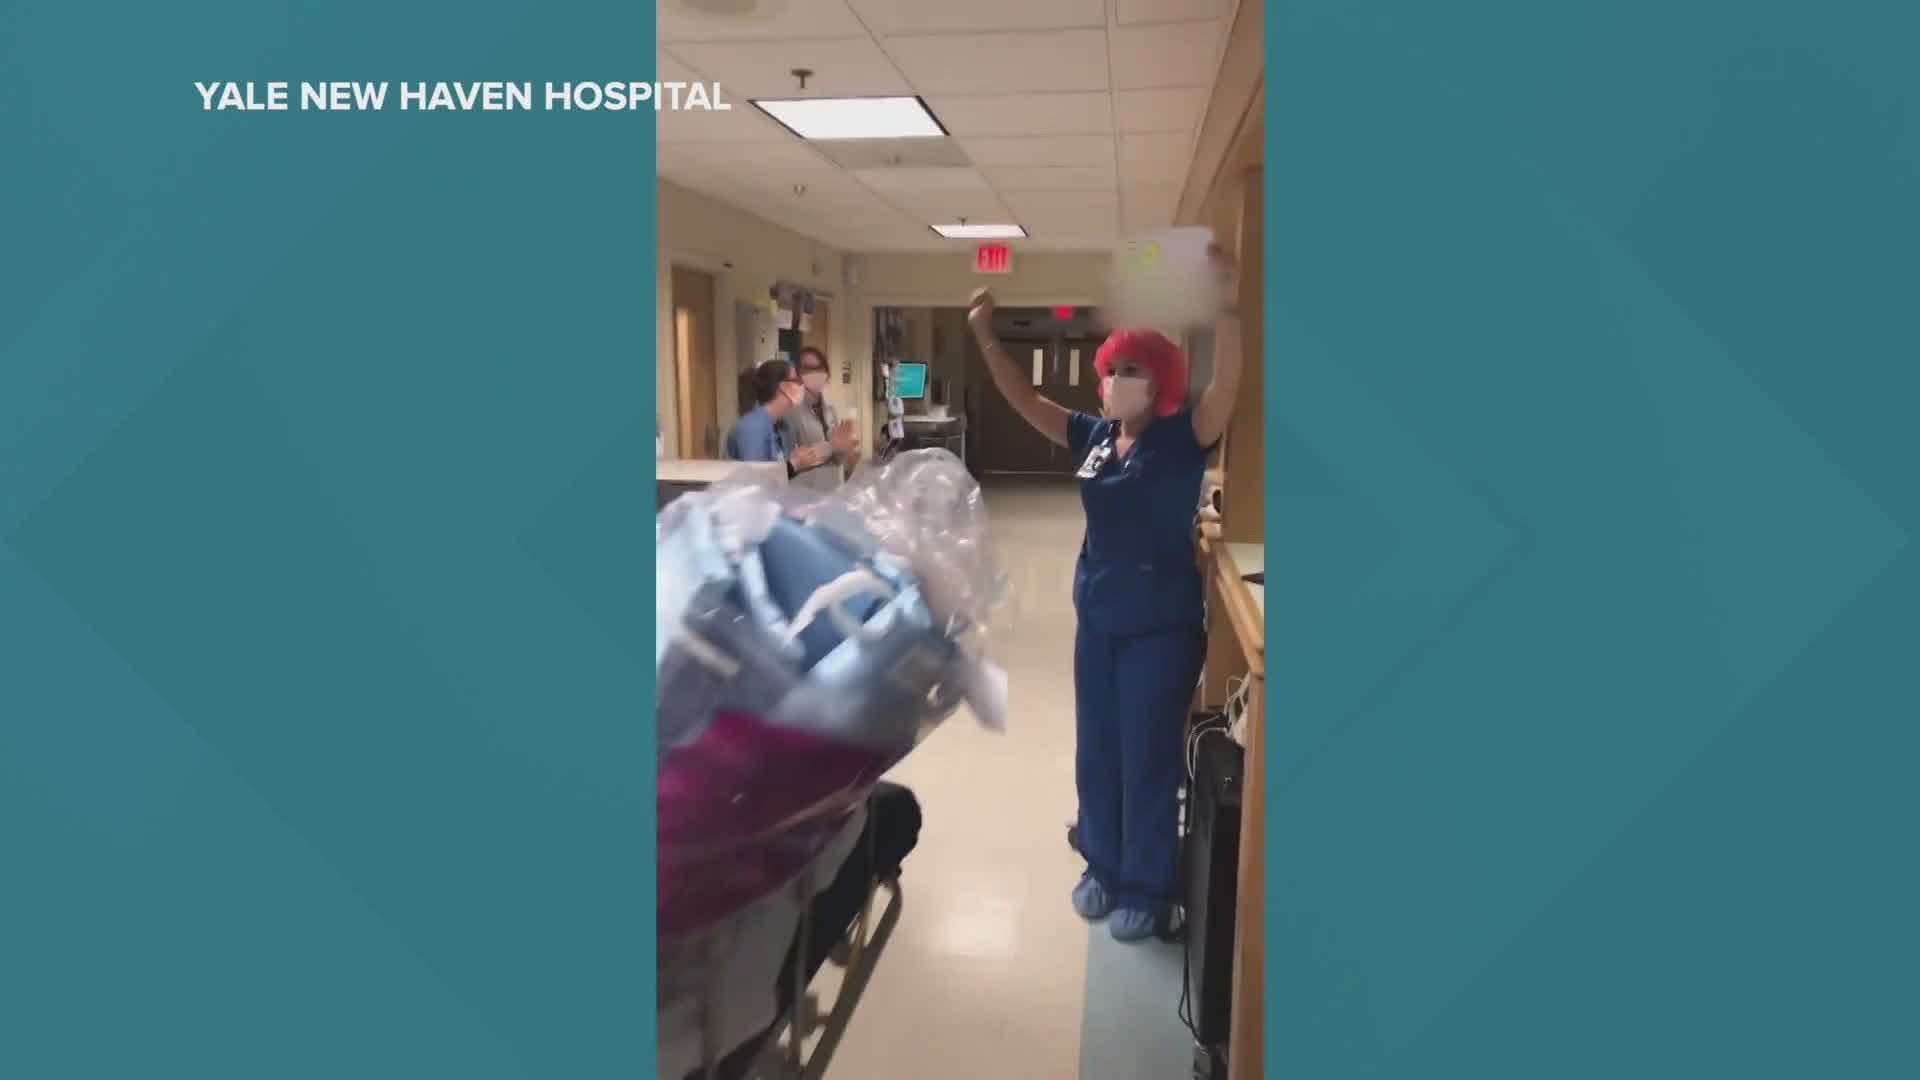 The patient at Yale-New Haven's St. Raphael's campus was moved to another floor after their condition improved